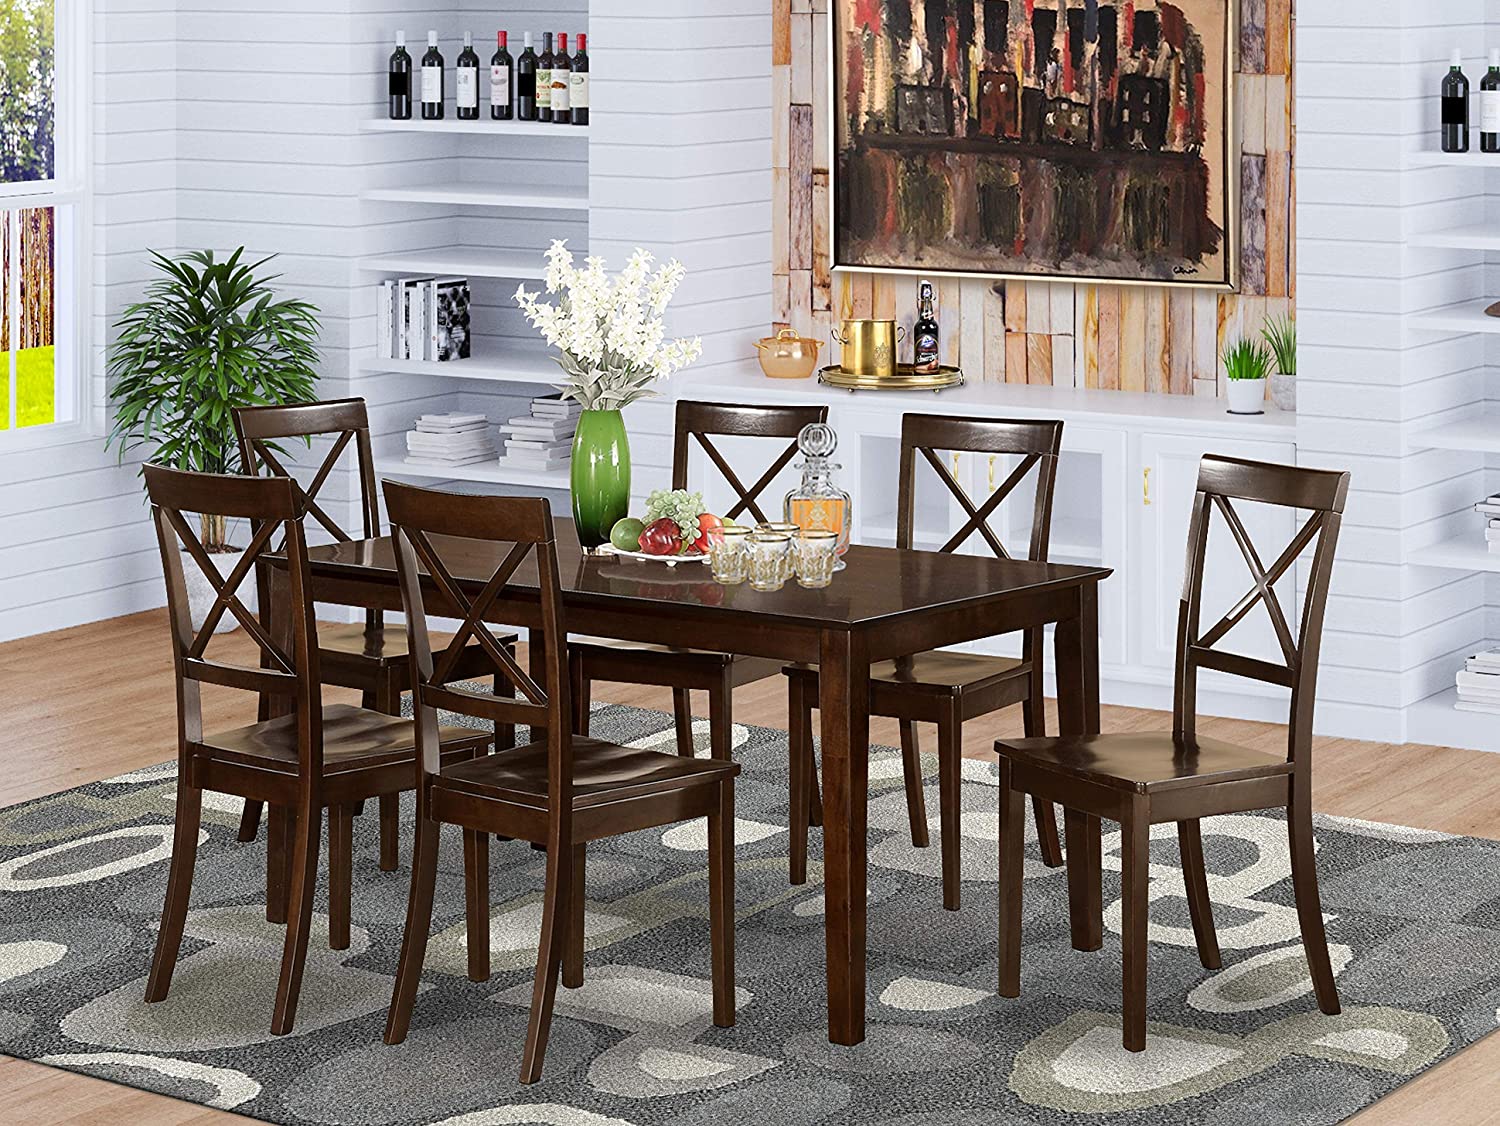 East West Furniture CAB7S-CAP-W Dining Set 7 Pc - Wooden Modern Dining Chairs Seat - Cappuccino Finish Small Rectangular Dining Table and Body